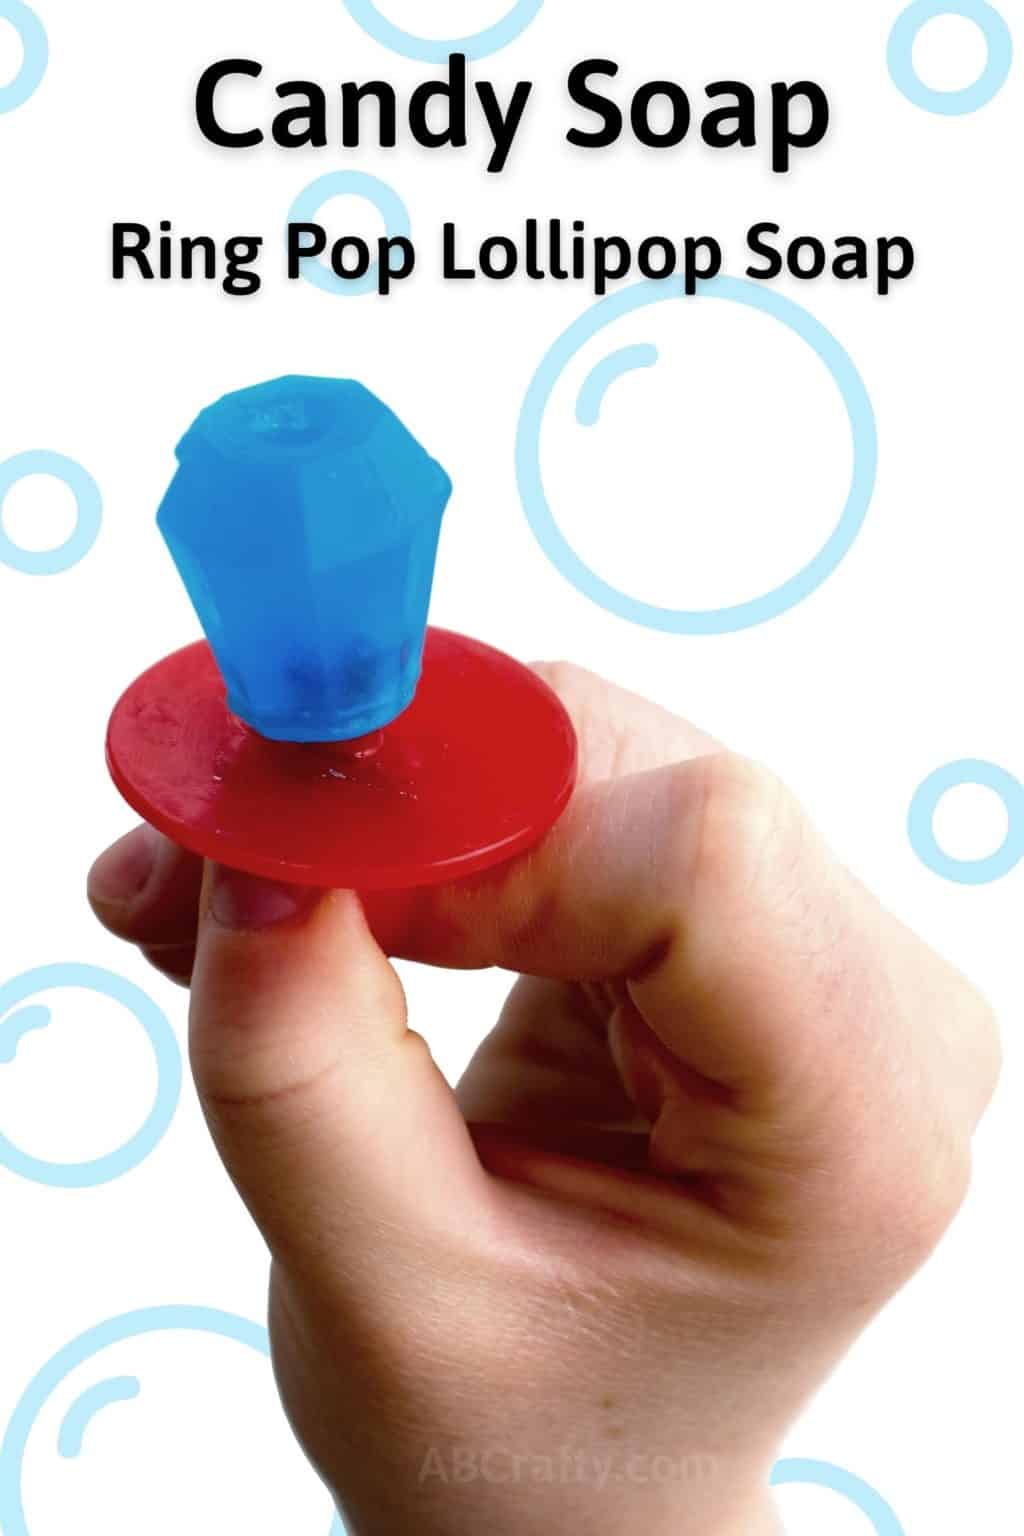 Holding a ring pop made out of soap with the title "Candy soap - ring pop lollipop soap"